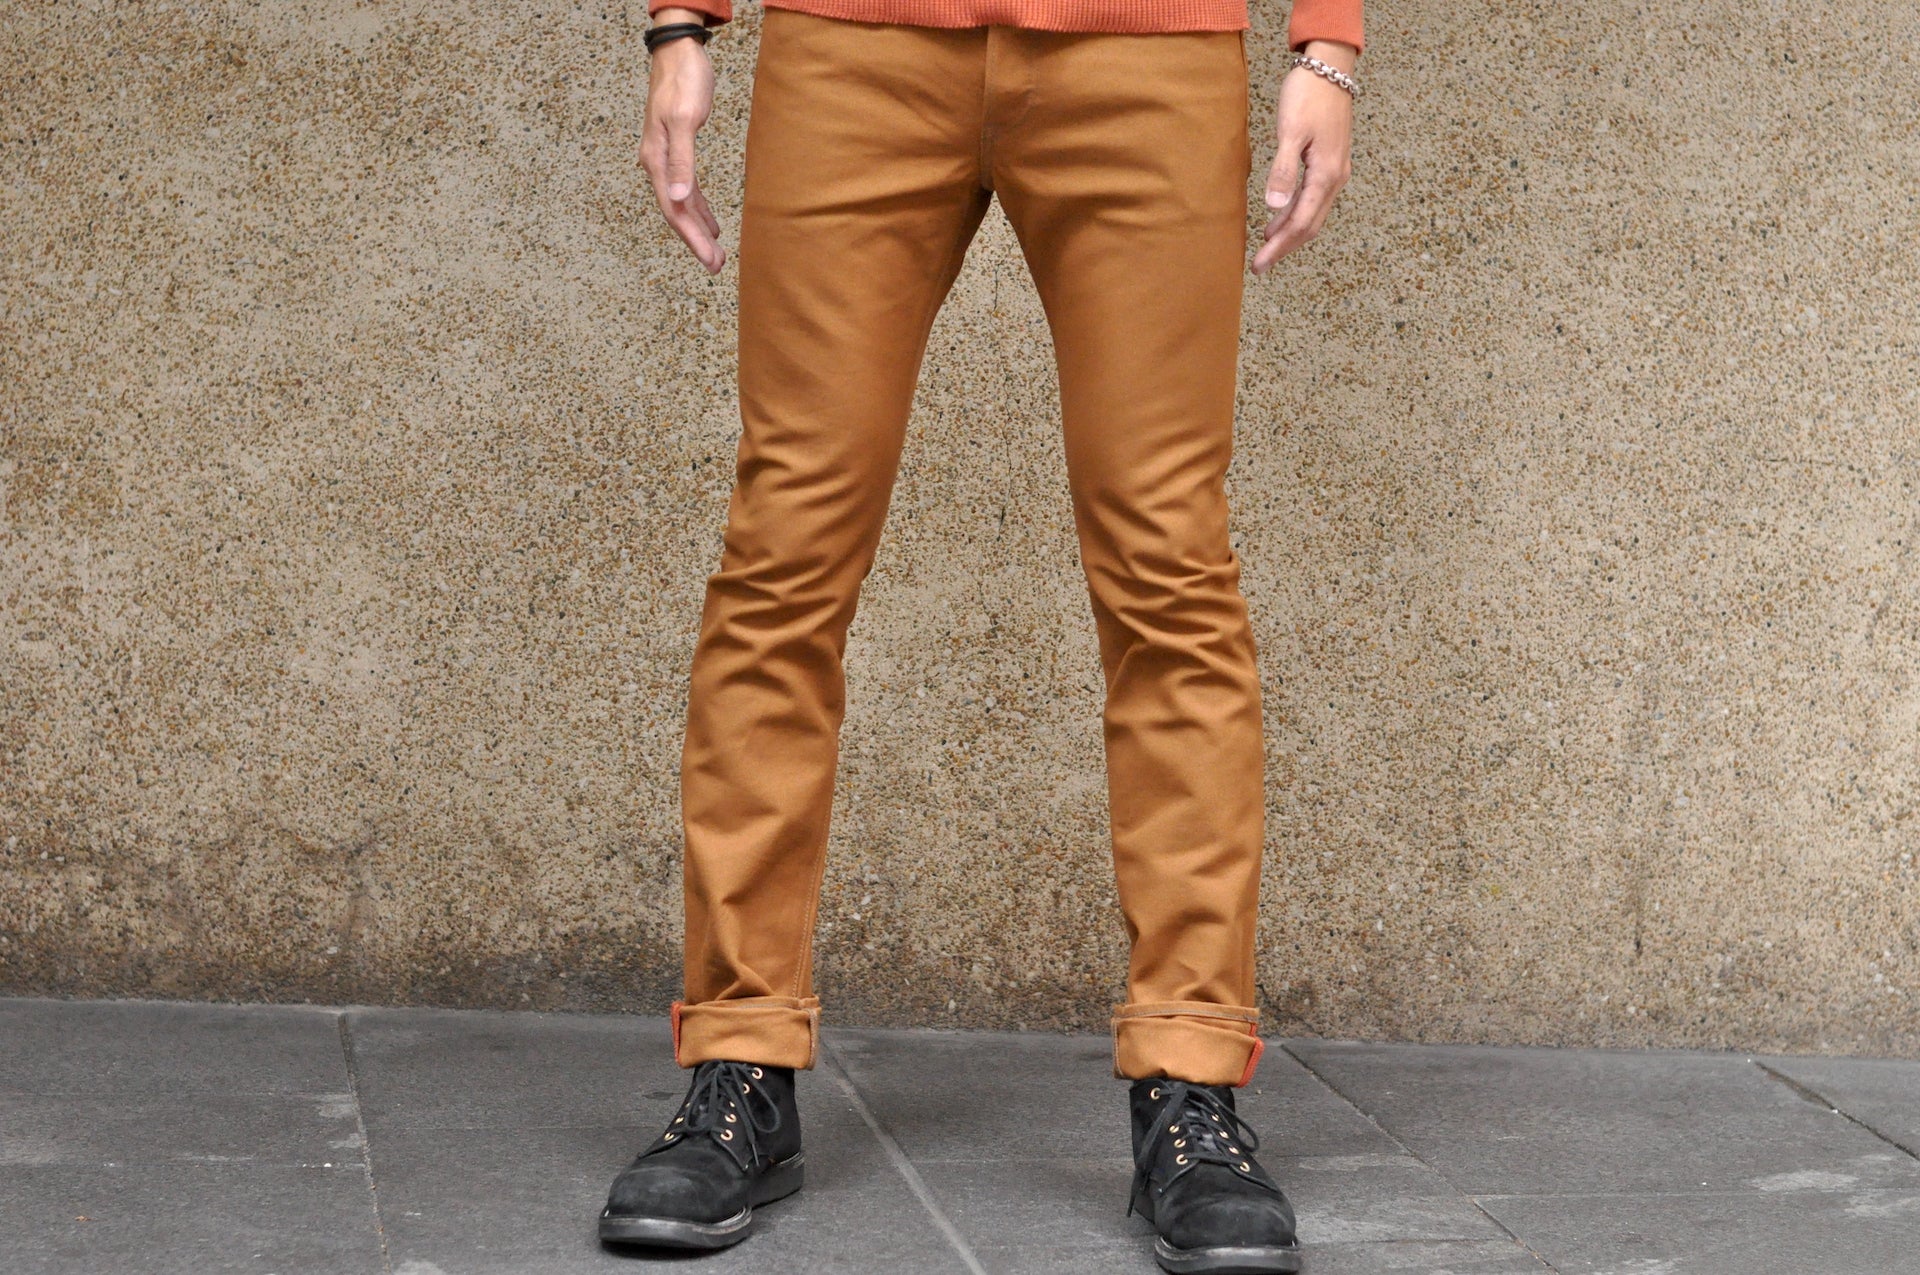 Iron Heart 17oz 555D Duck Canvas Trousers (Slim Tapered fit)